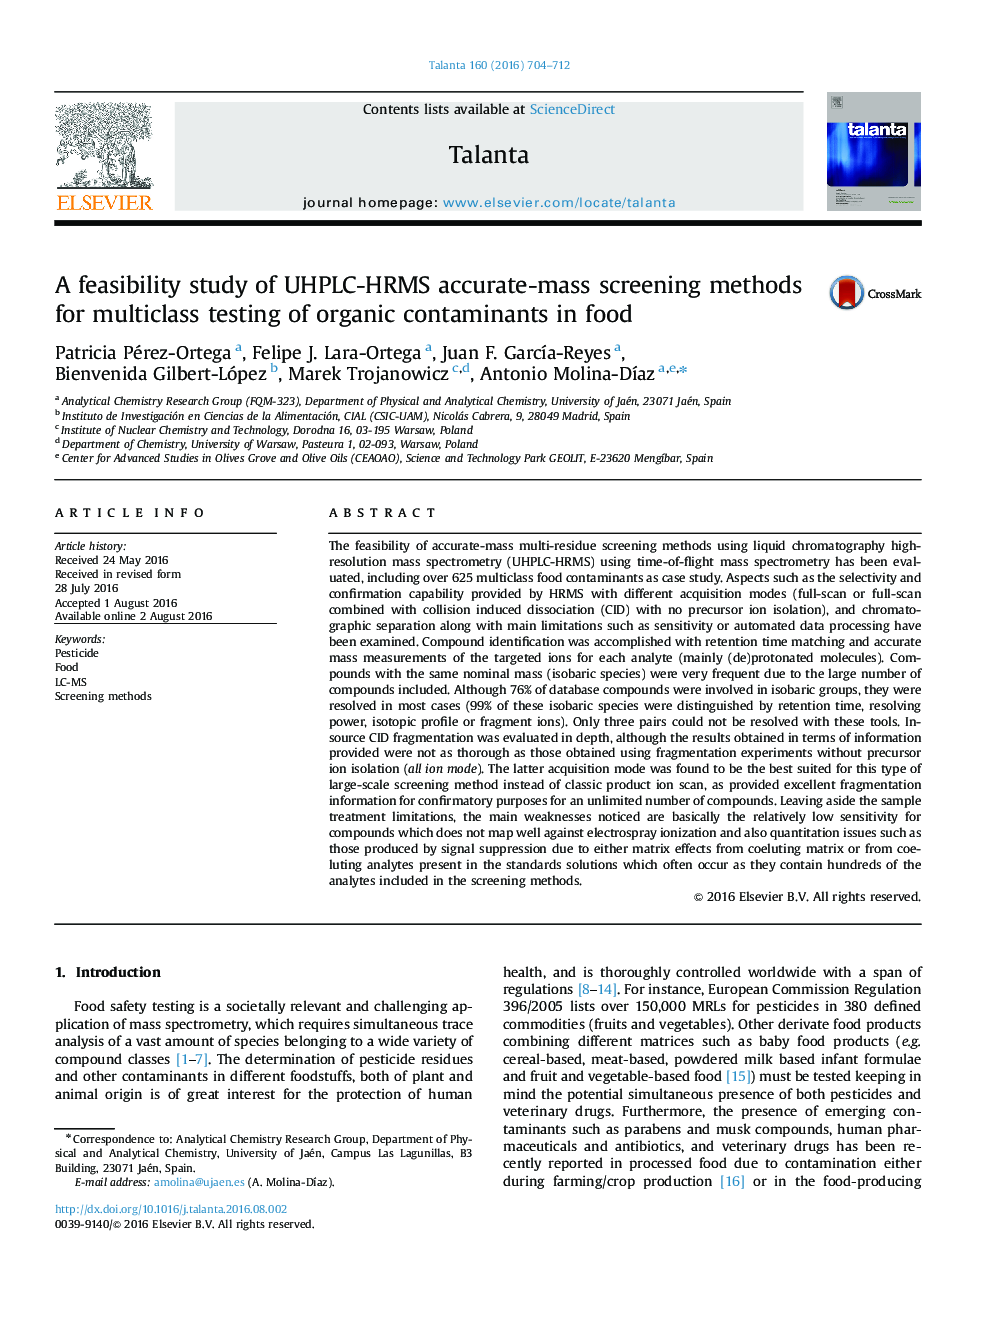 A feasibility study of UHPLC-HRMS accurate-mass screening methods for multiclass testing of organic contaminants in food